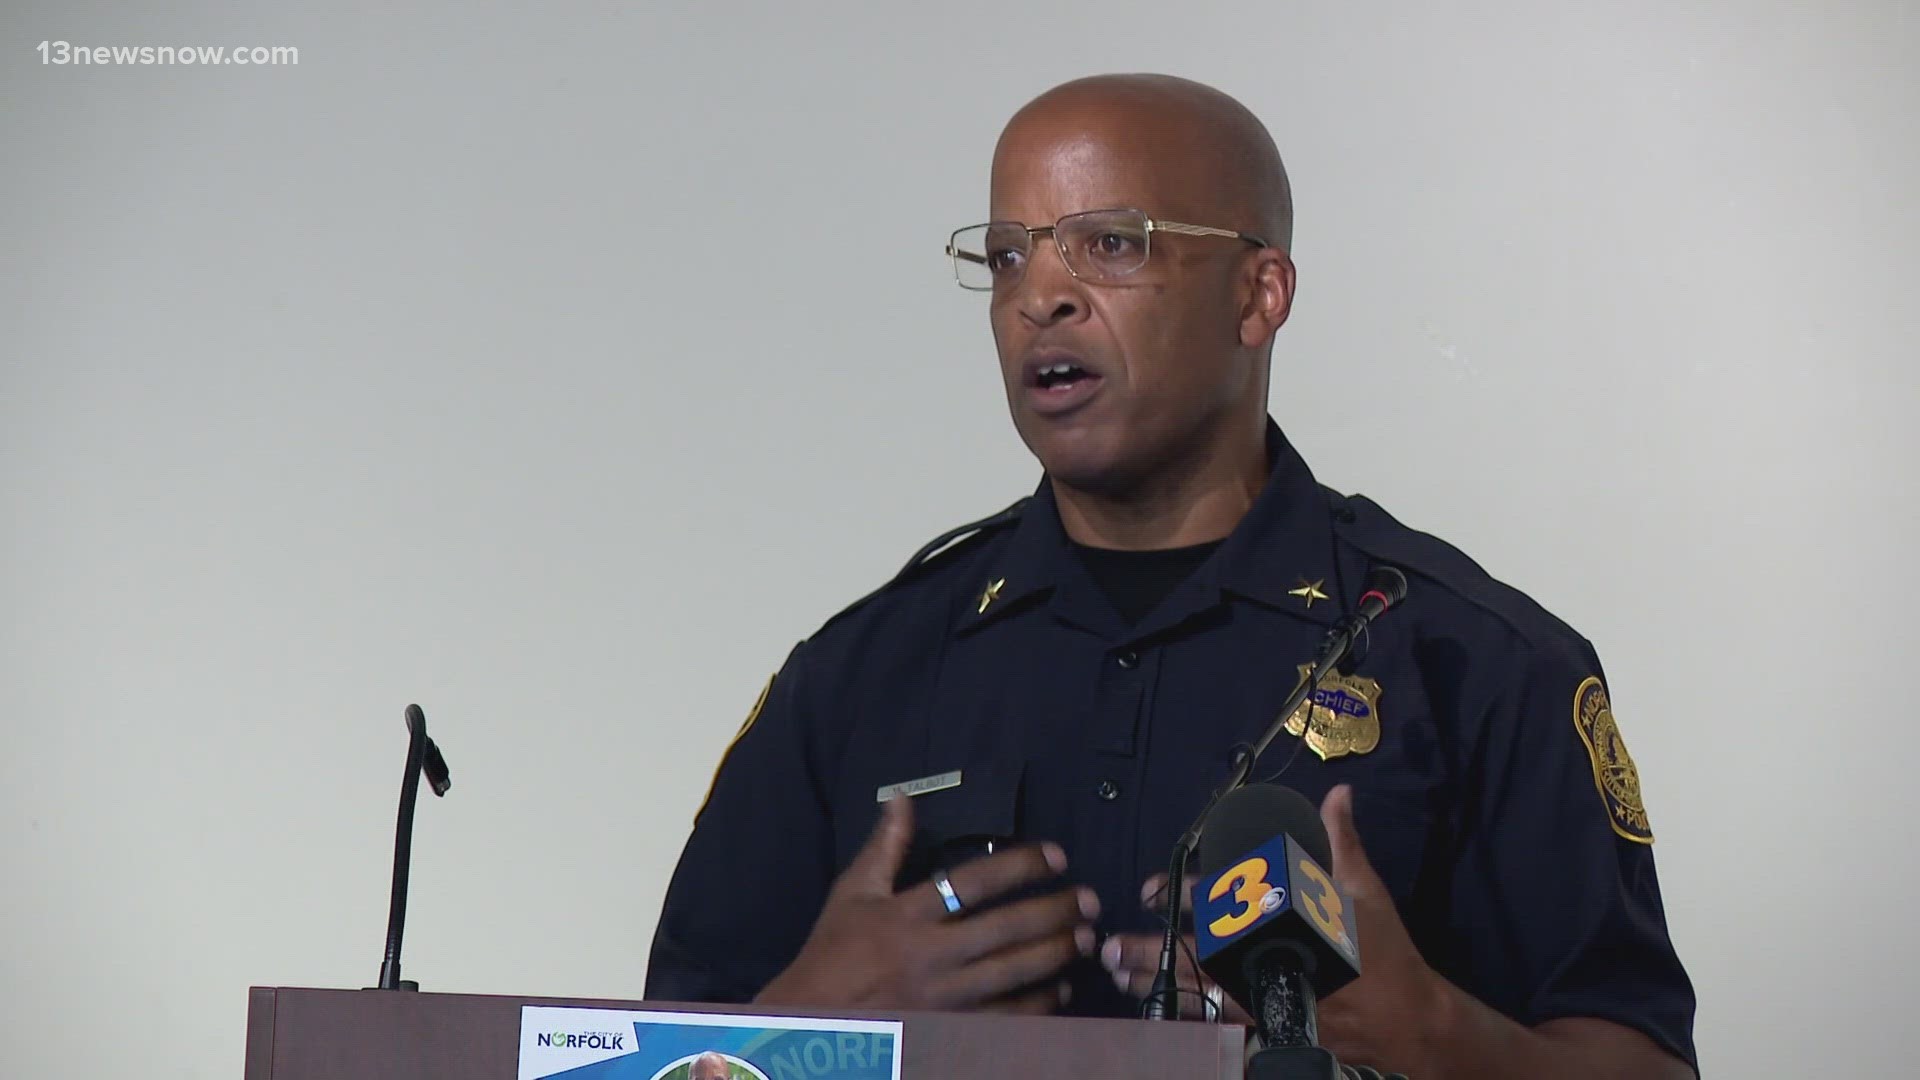 Norfolk Police Chief Mark Talbot will provide an update to city council members on public safety. We recently reported Norfolk is seeing a decrease in homicides.